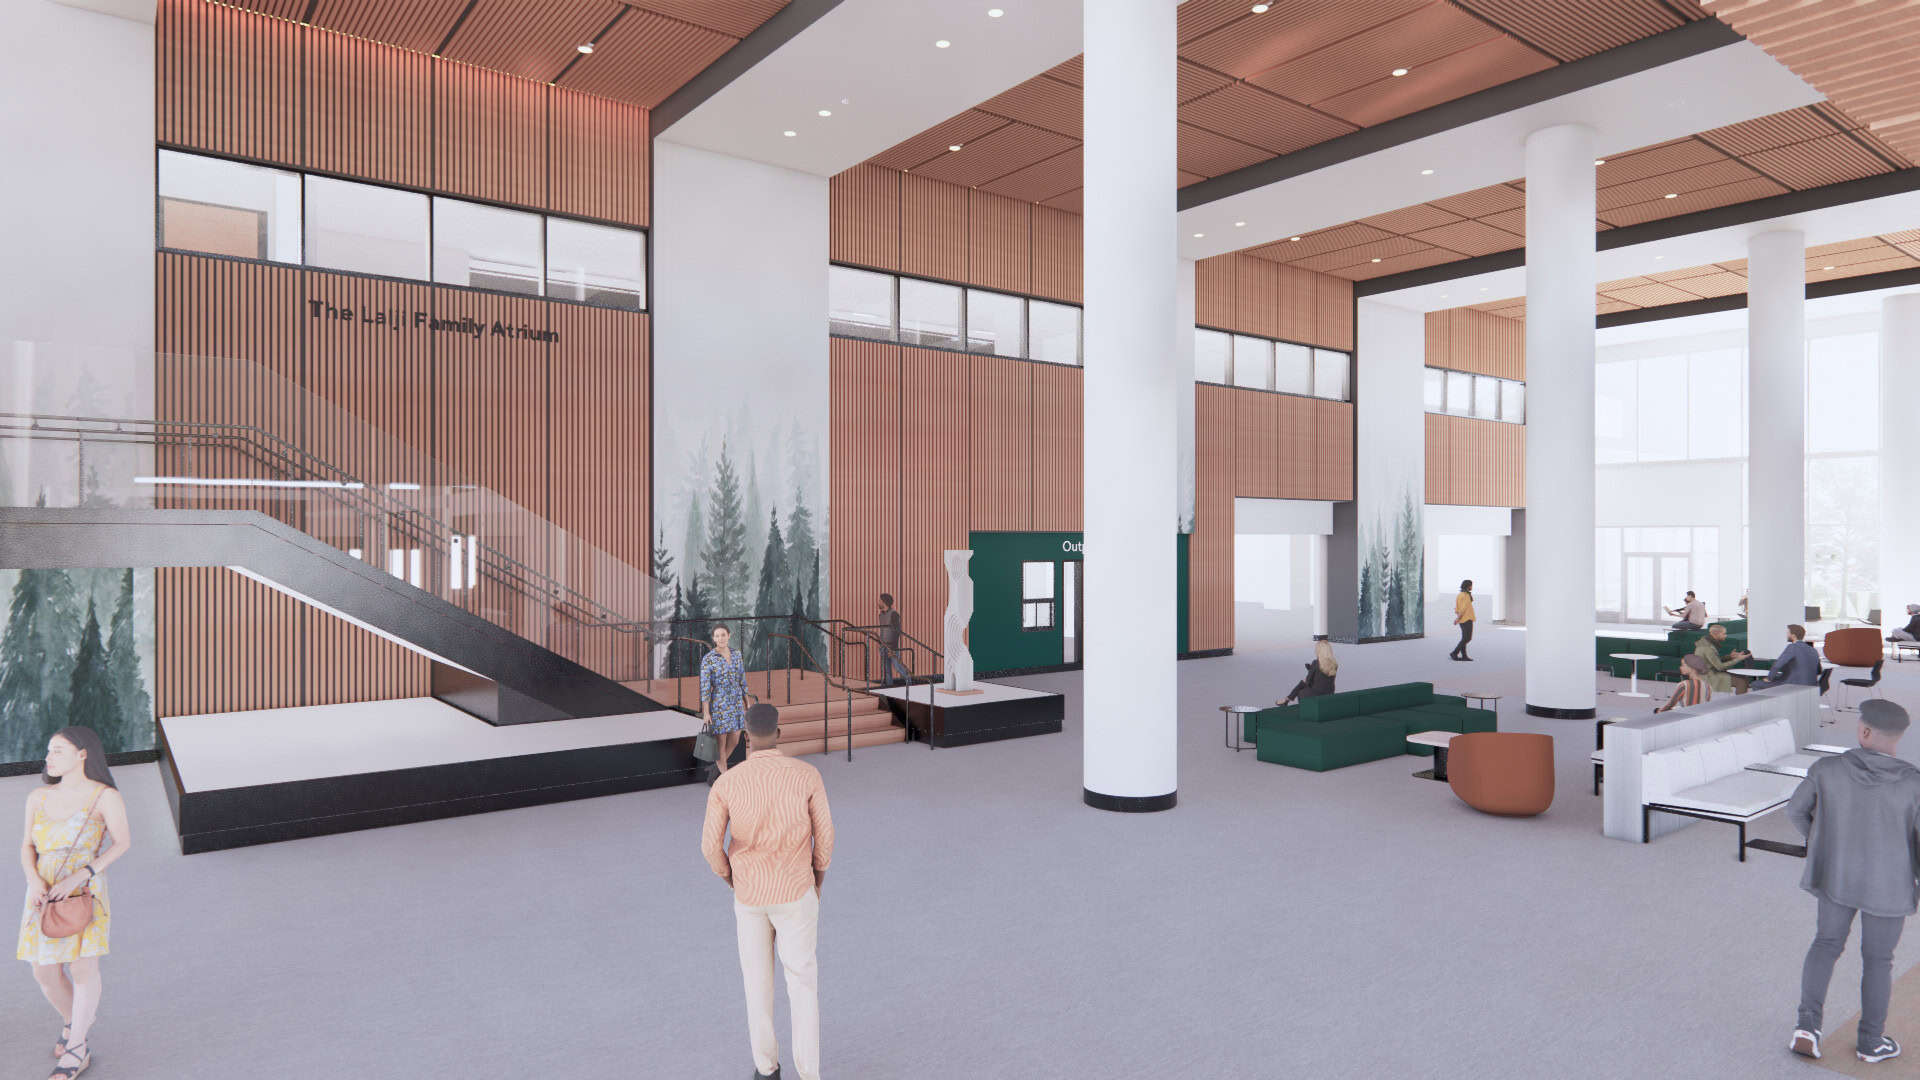 Rendering of the new St. Paul's Hospital level 1 atrium seating space featuring flow to ceiling windows and wood paneling.